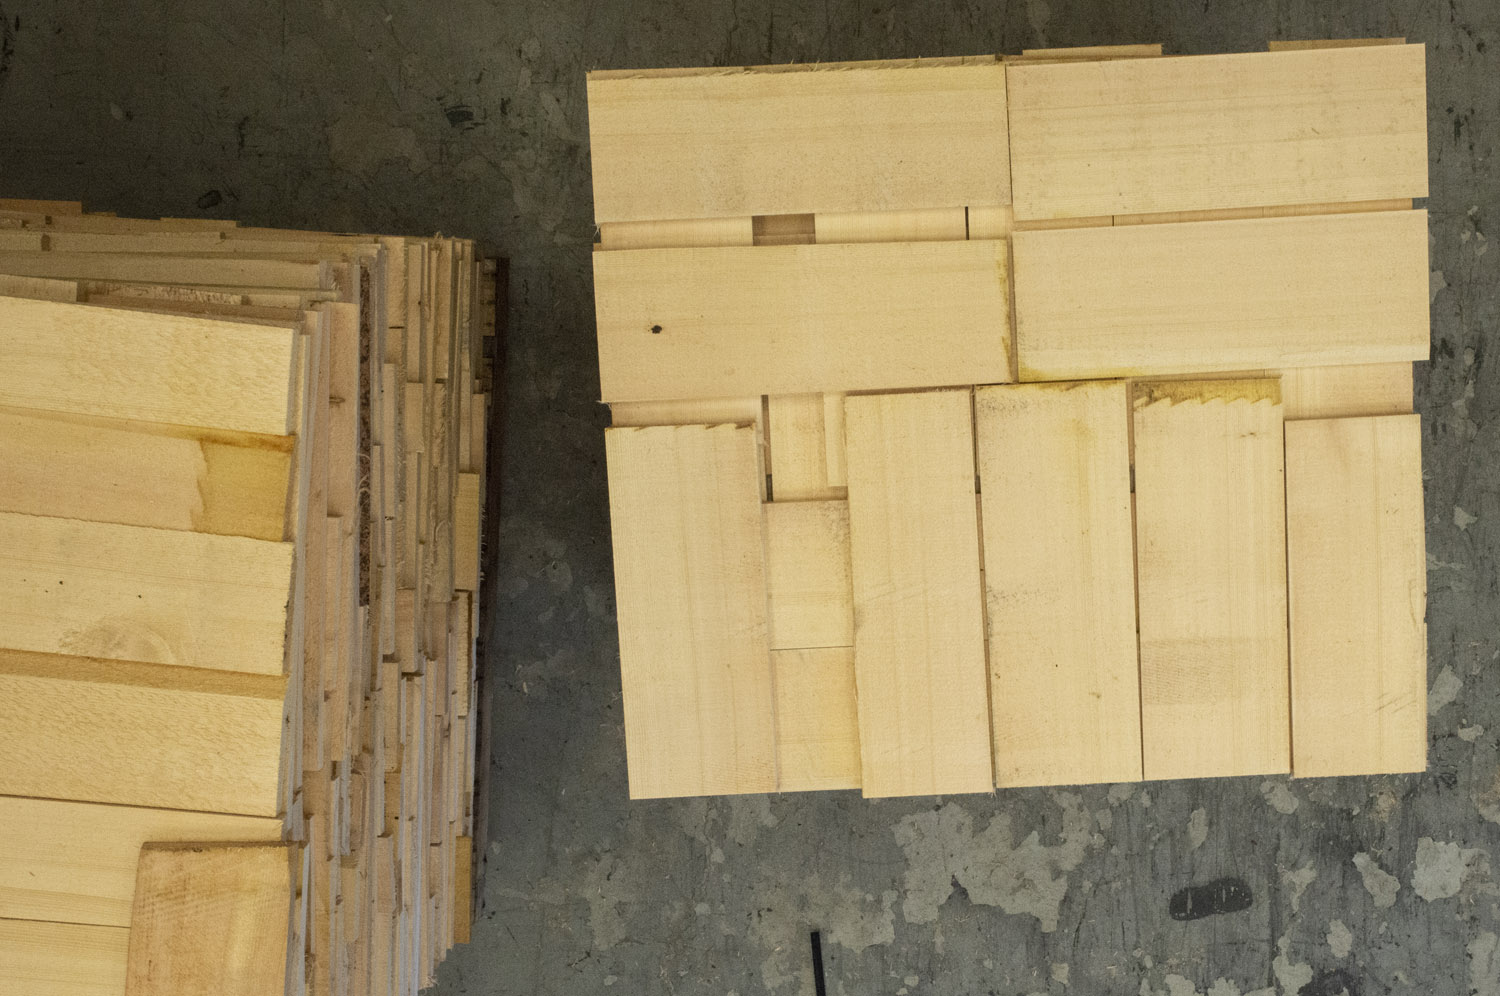 2 X 7 Wood, Poplar, also referred to as tulip poplar, yellow poplar, or  white poplar, dimensional hardwood lumber is ready for your craftsmanship  to be made ….